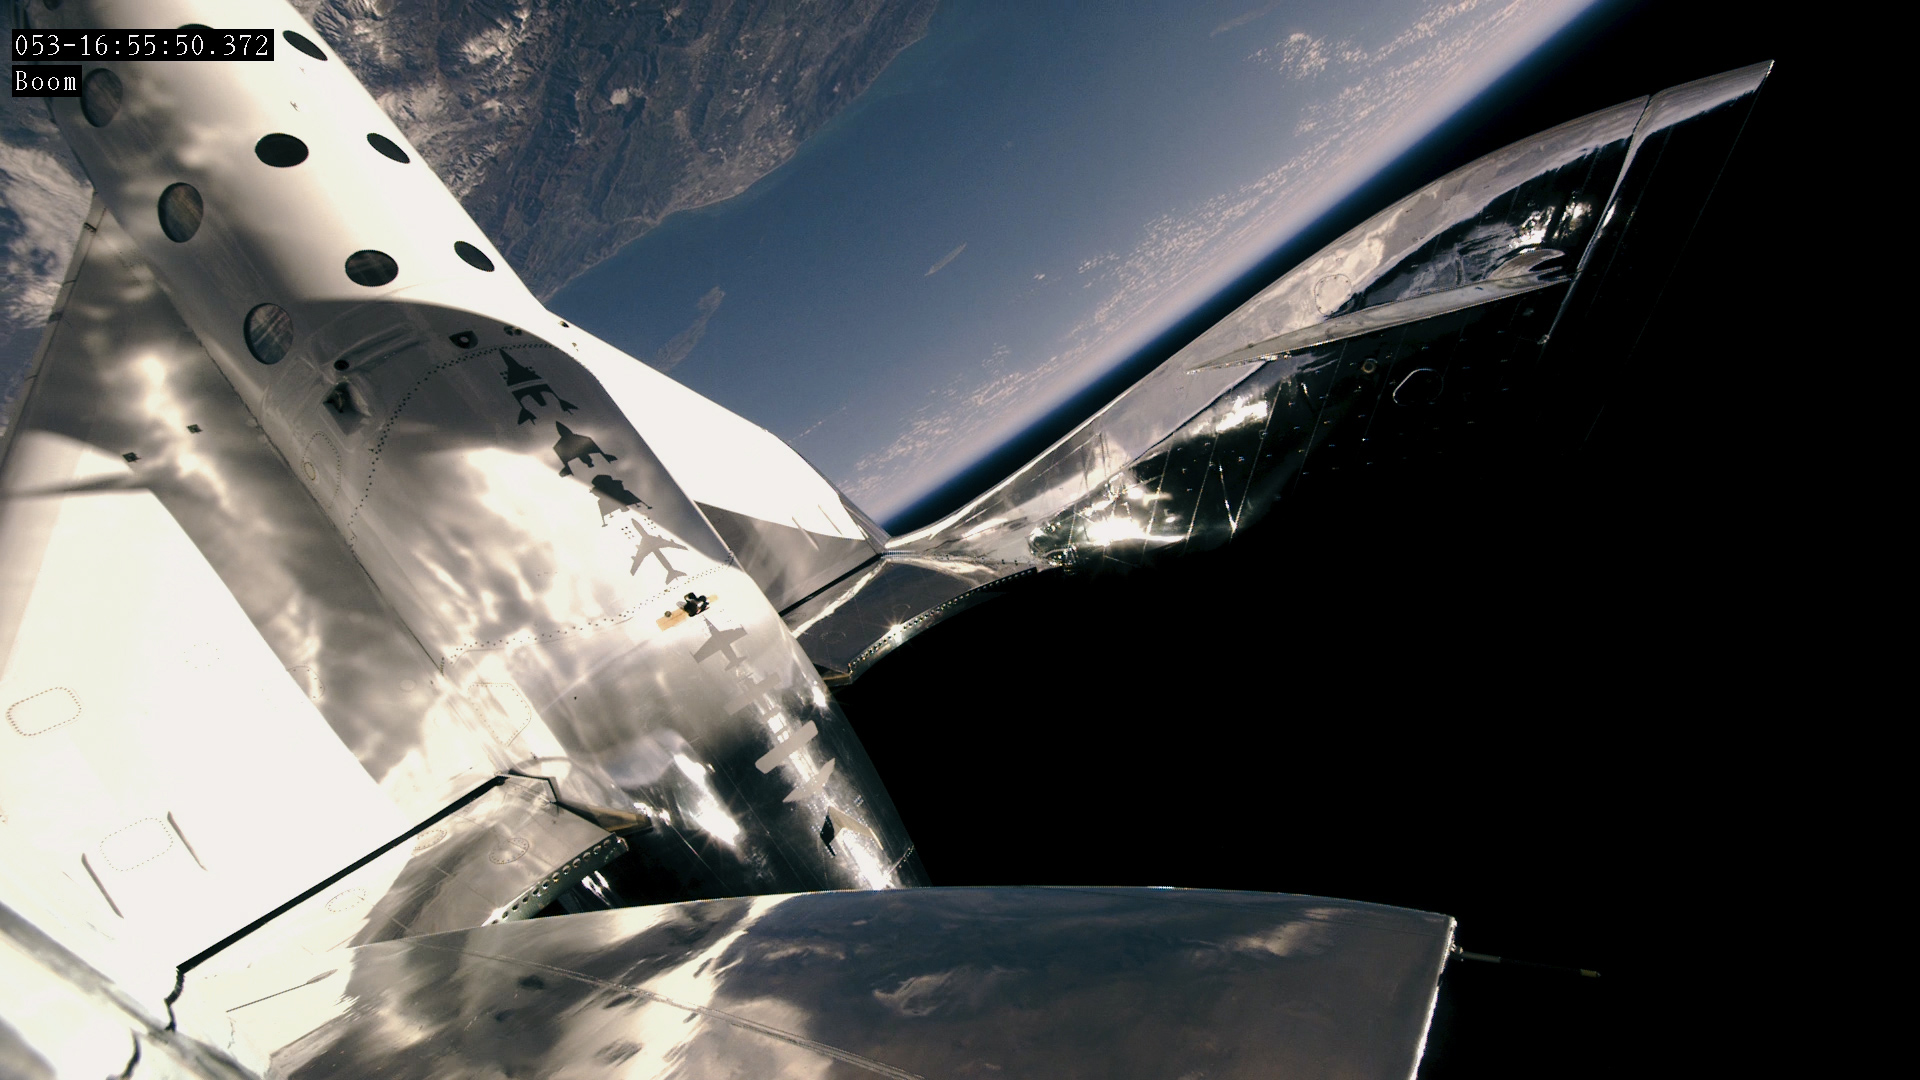 When Is Richard Branson Going to Space? How to Livestream Virgin Galactic VSS Unity Launch